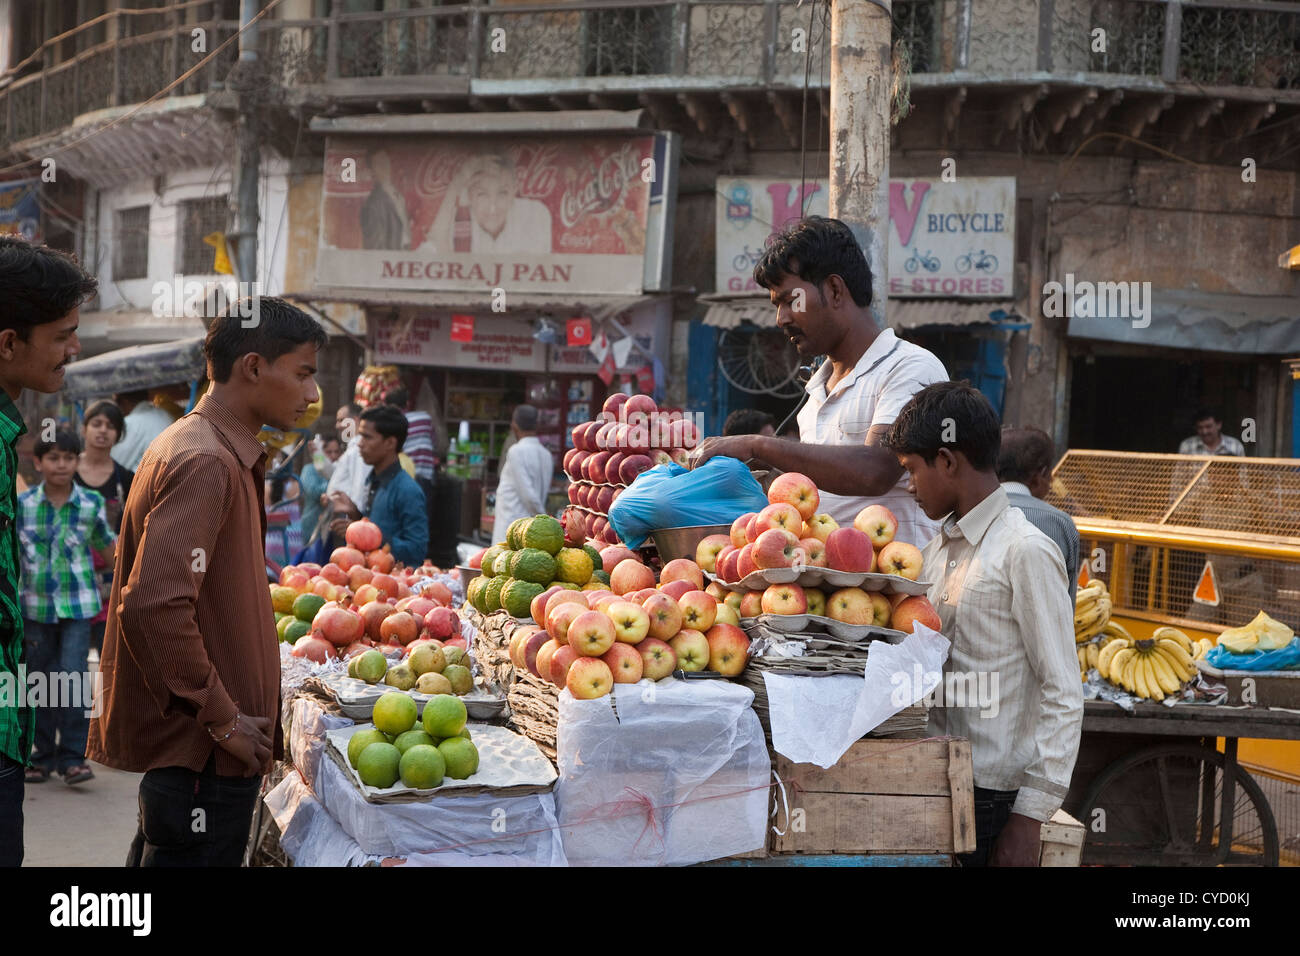 Man buying apples from a vendor on Esplanade Road in Old Delhi - India Stock Photo